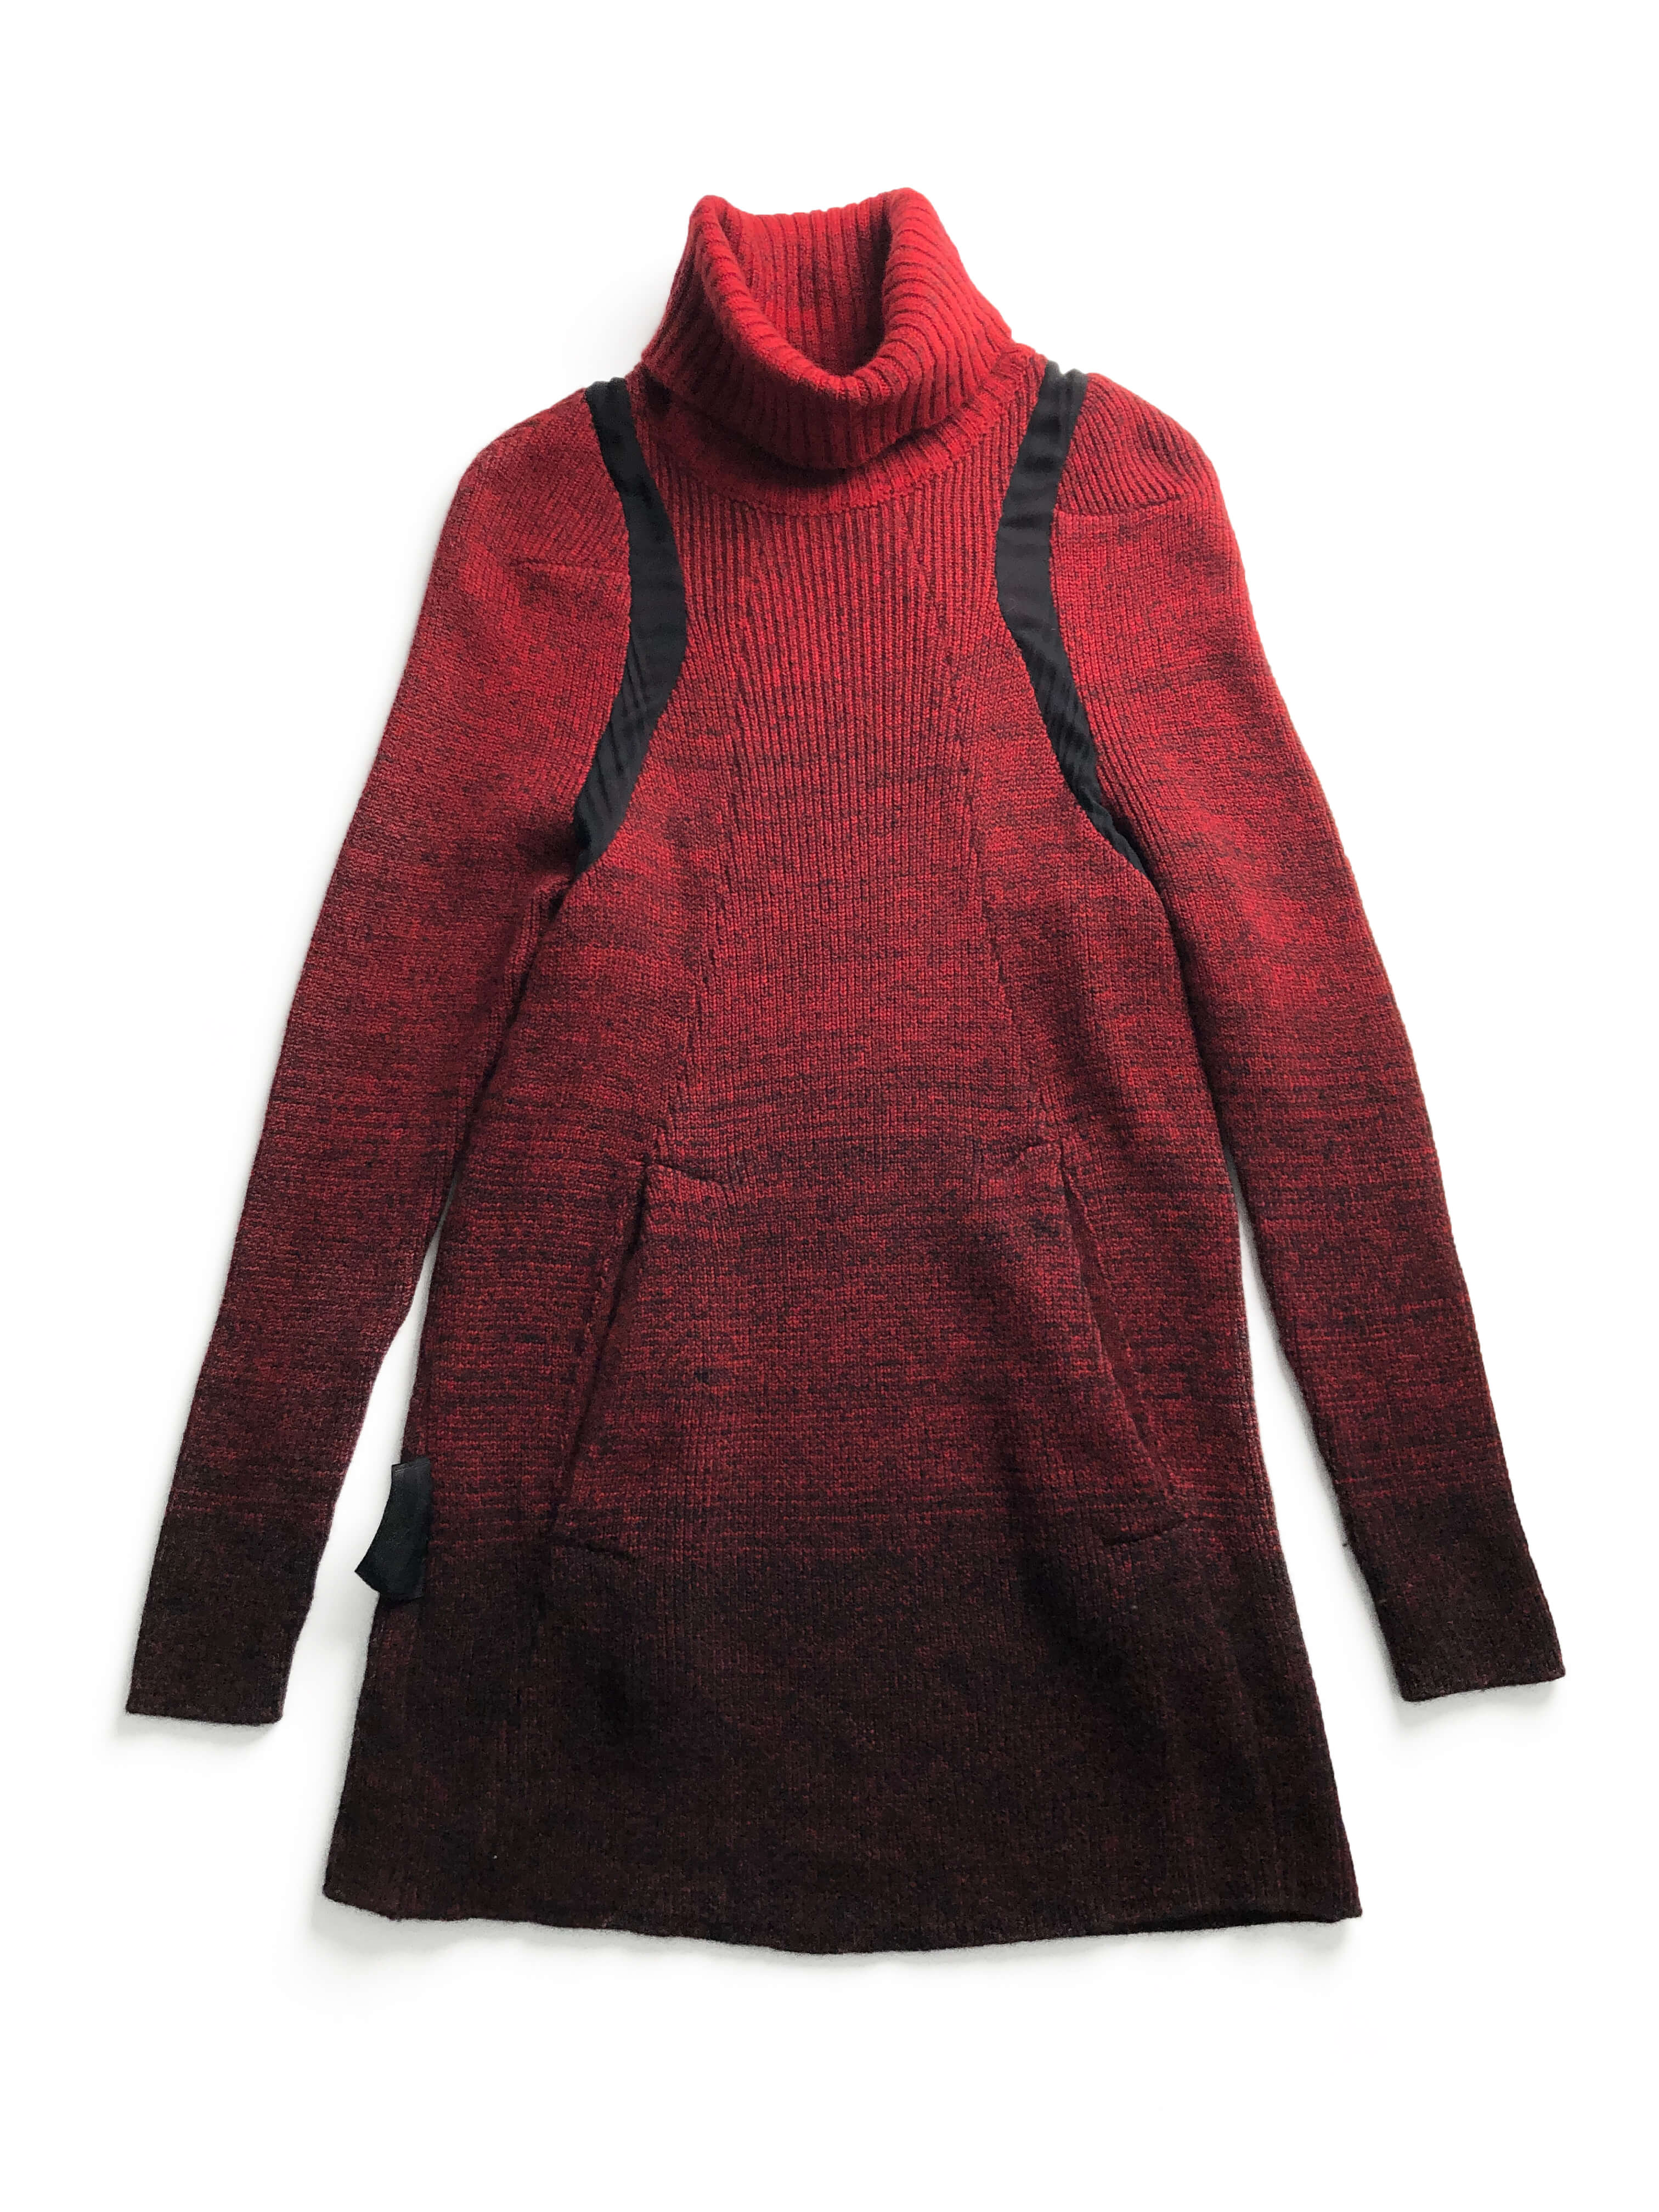 UNDERCOVER 2009aw knit onepiece